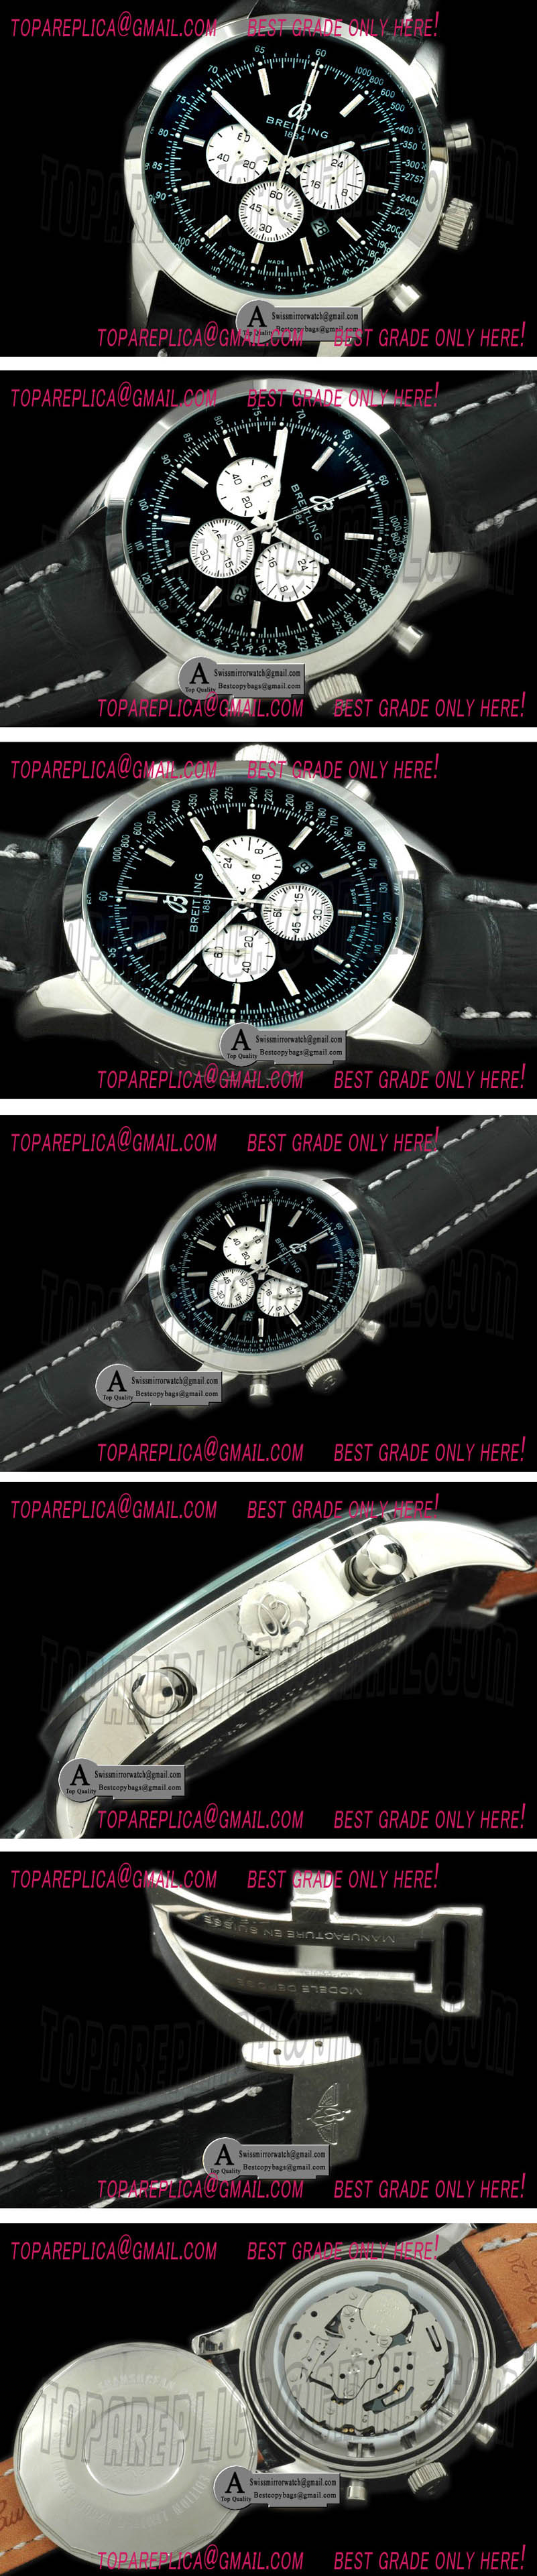 Breitling TransOcean Chrono SS/Leather Black Jap OS20 Qtz Replica Watches